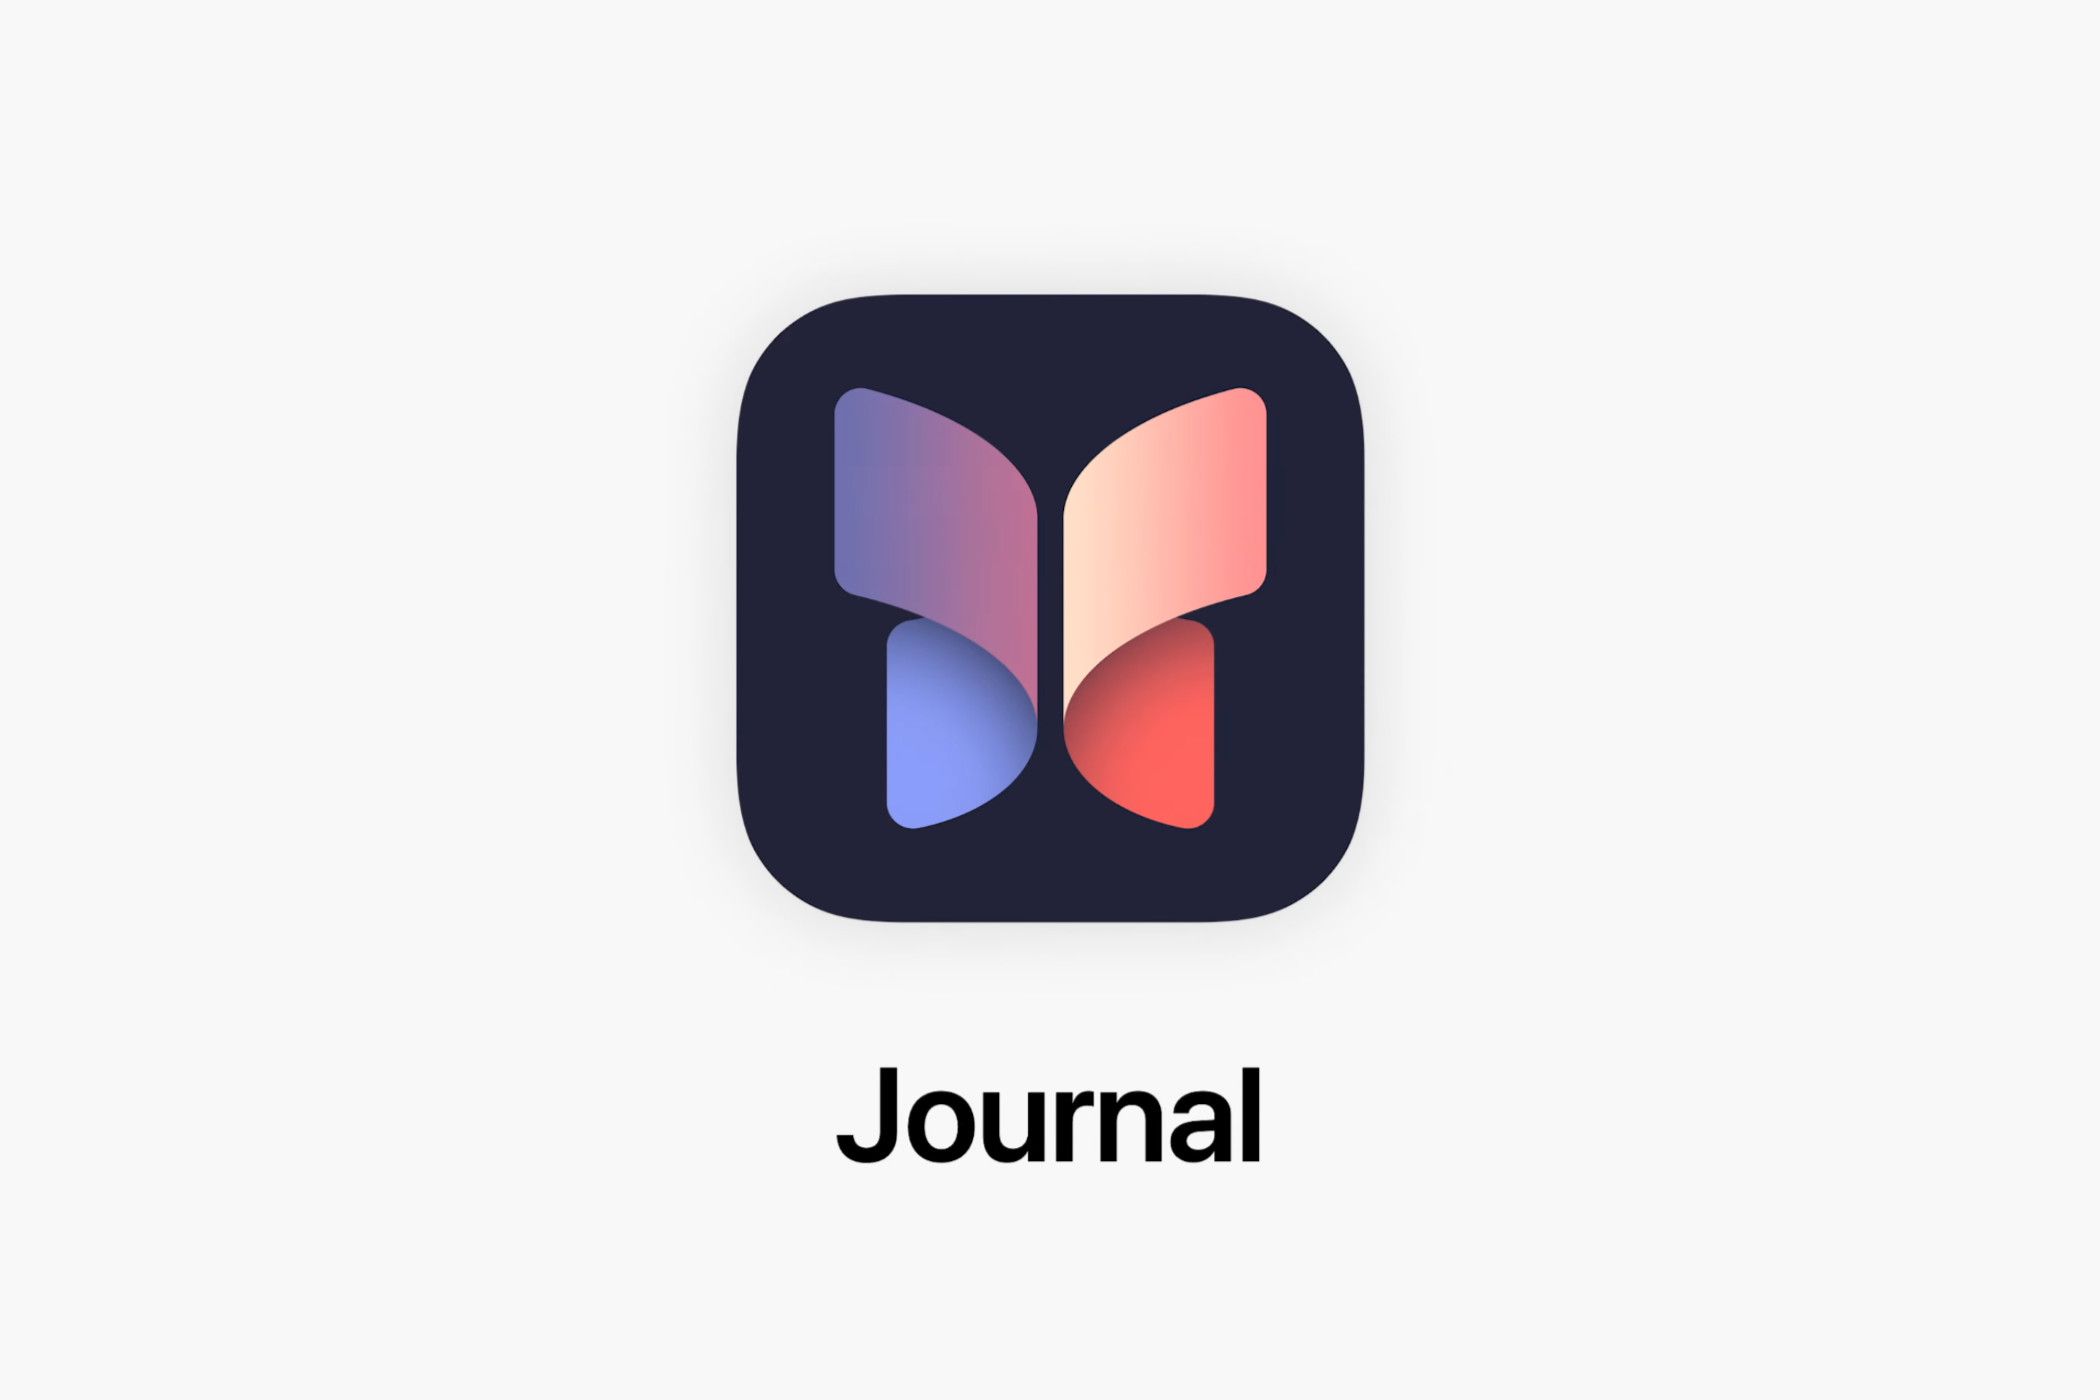 Why You Should Use Your iPhone’s Built-in Journal App